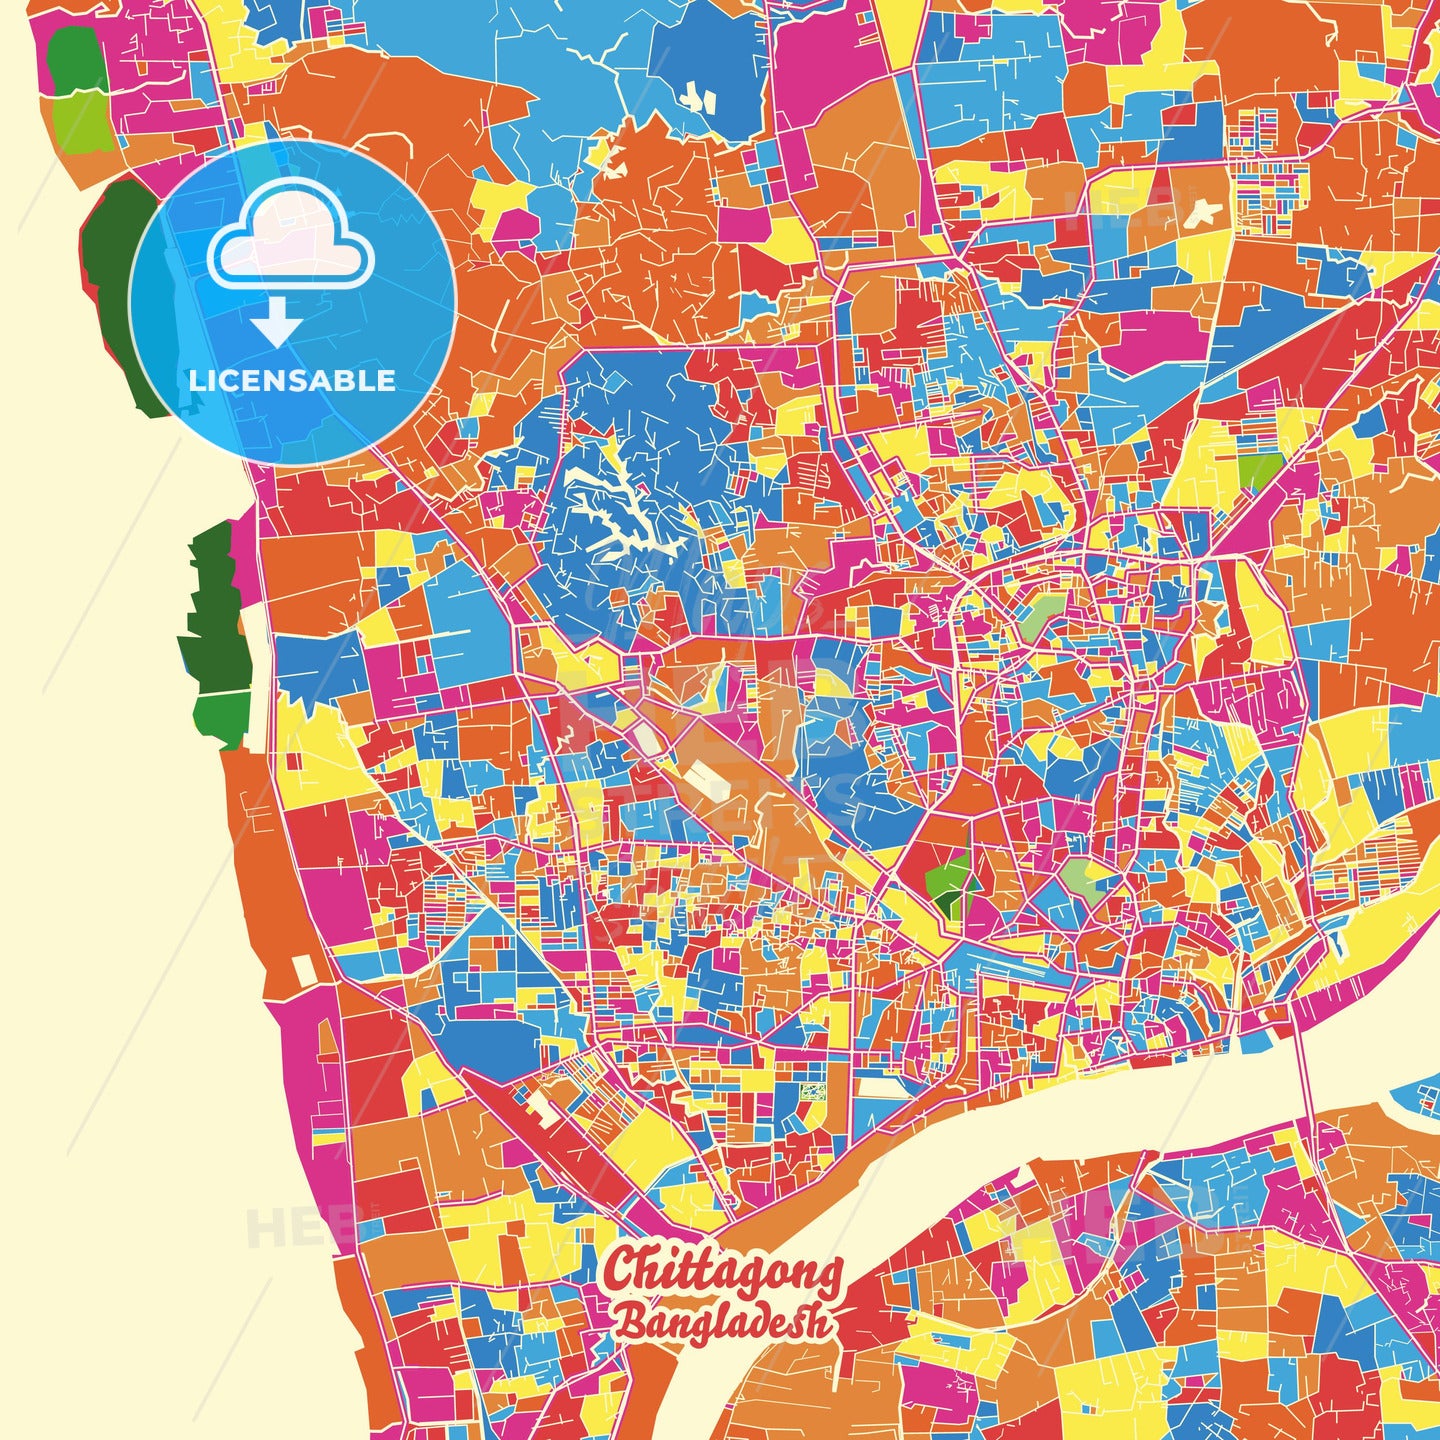 Chittagong, Bangladesh Crazy Colorful Street Map Poster Template - HEBSTREITS Sketches